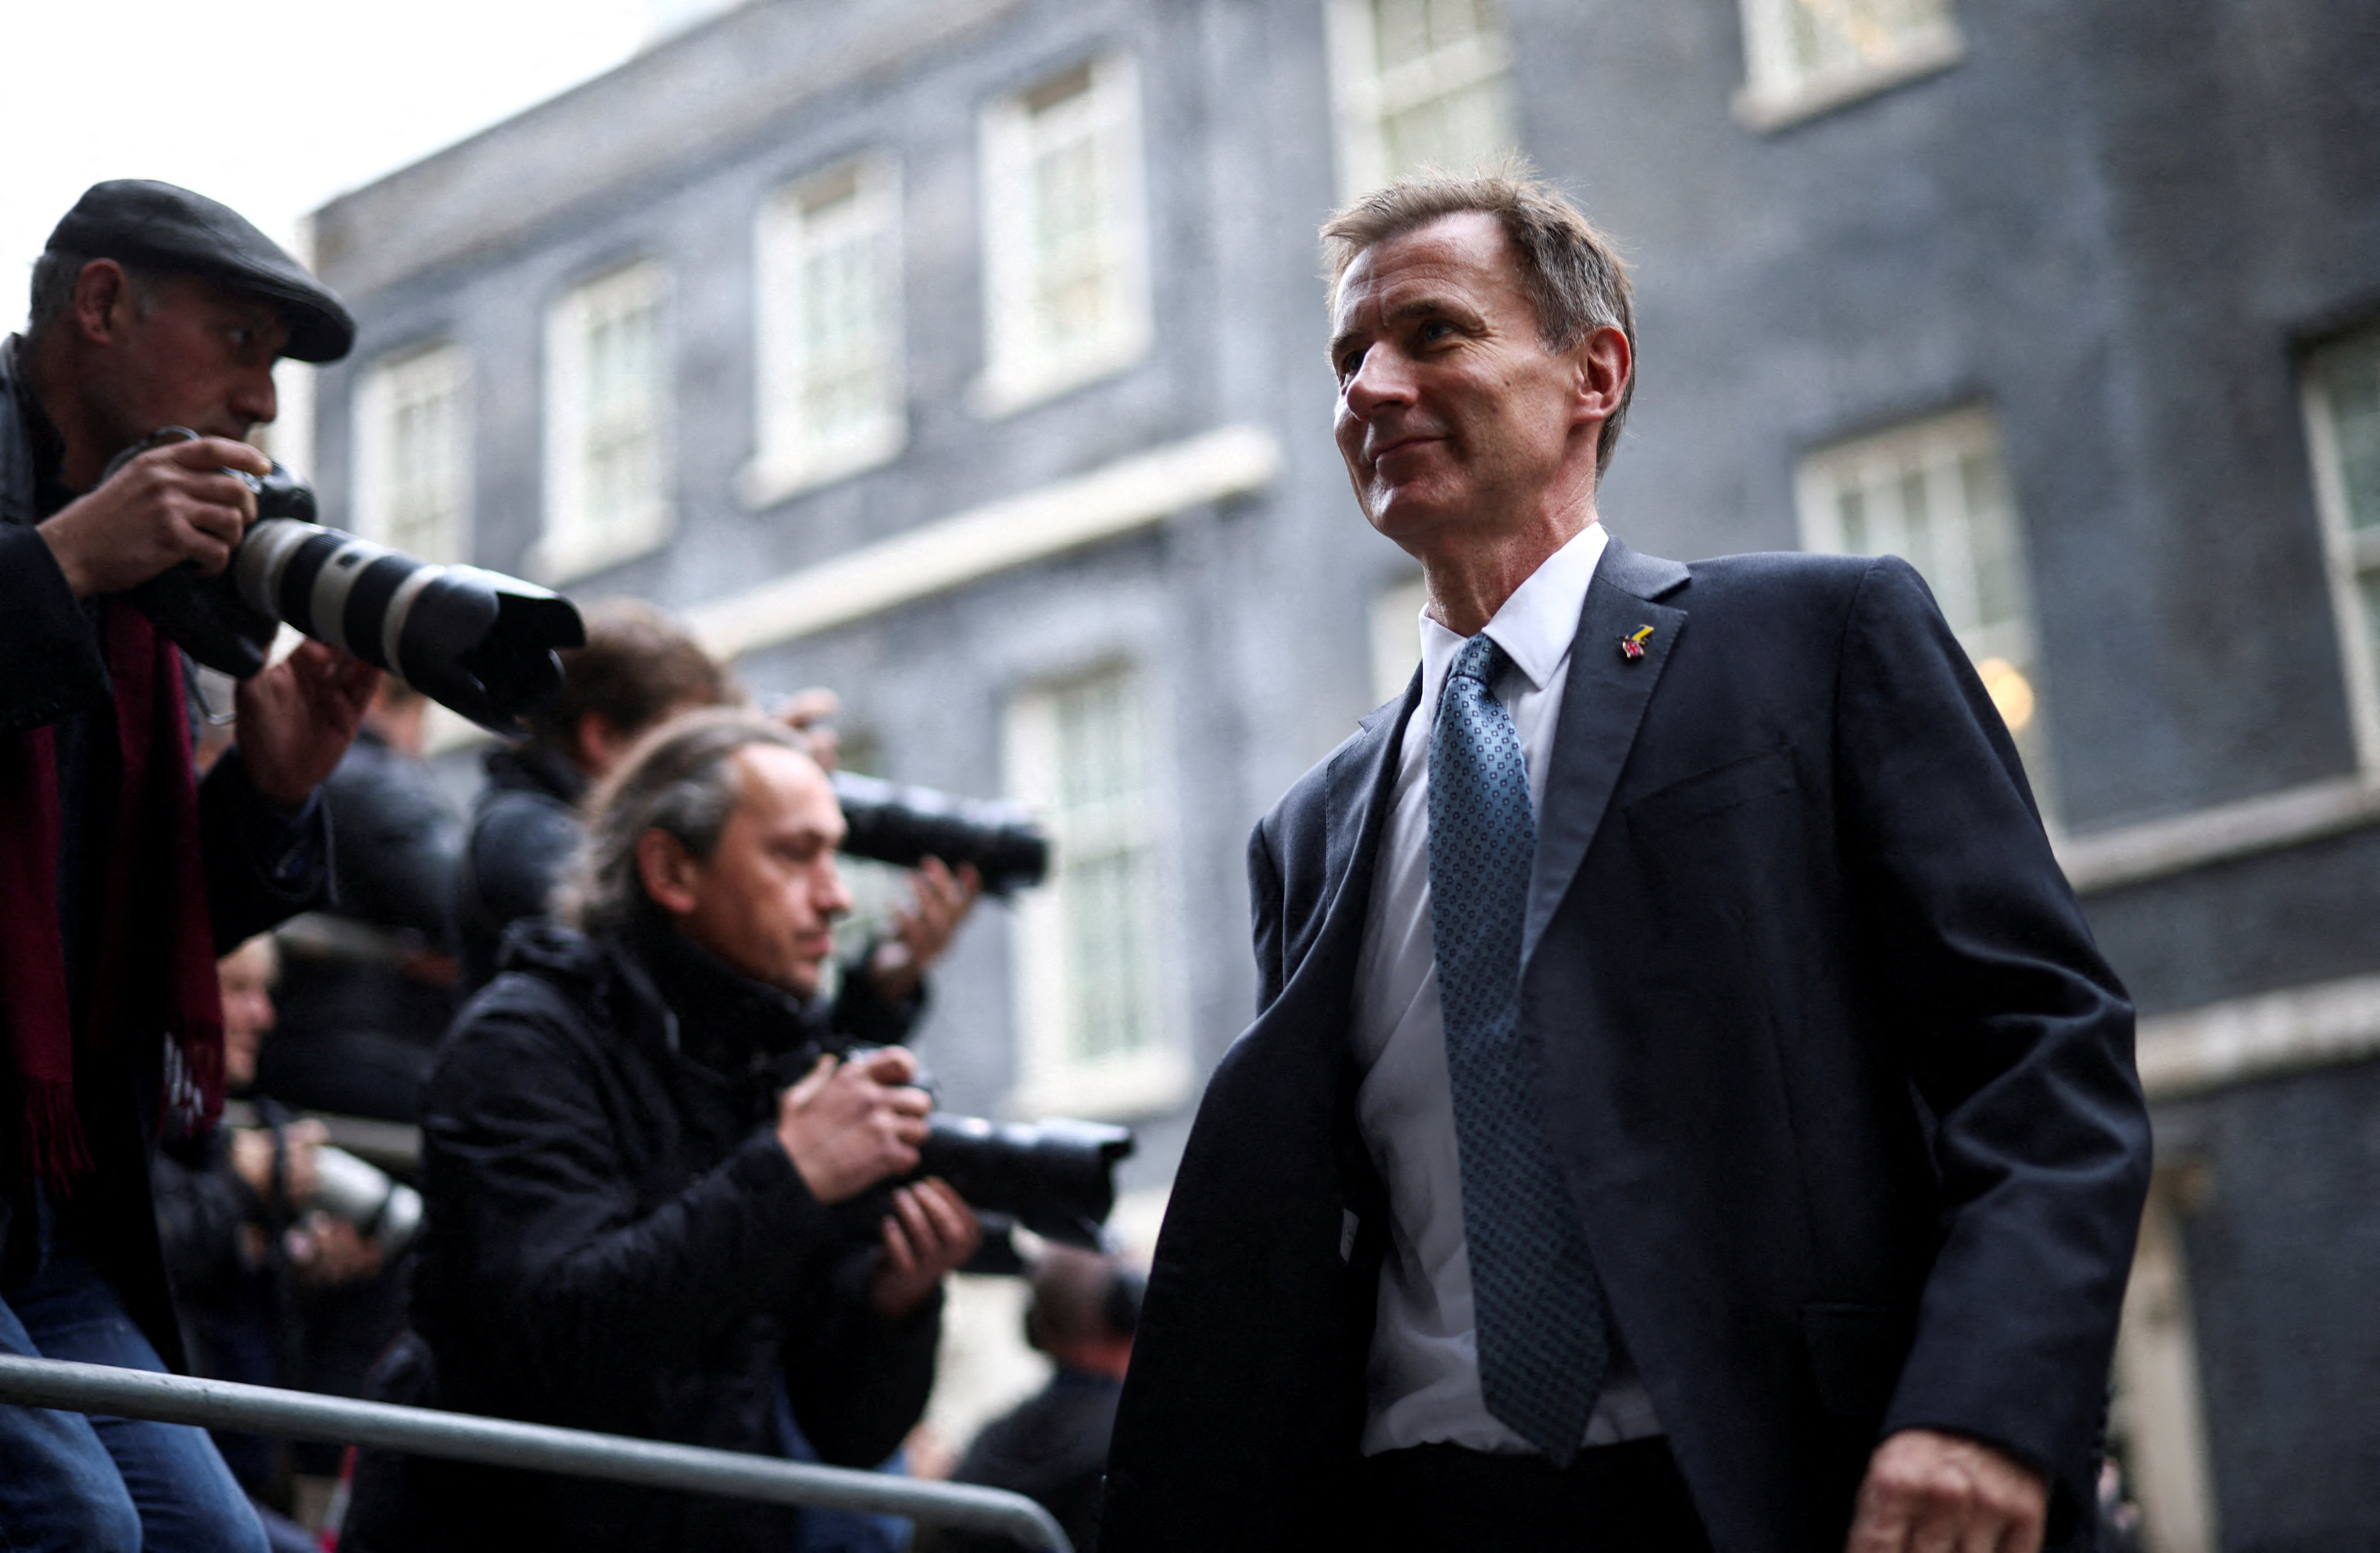 British Chancellor of the Exchequer Jeremy Hunt. Photo: Reuters